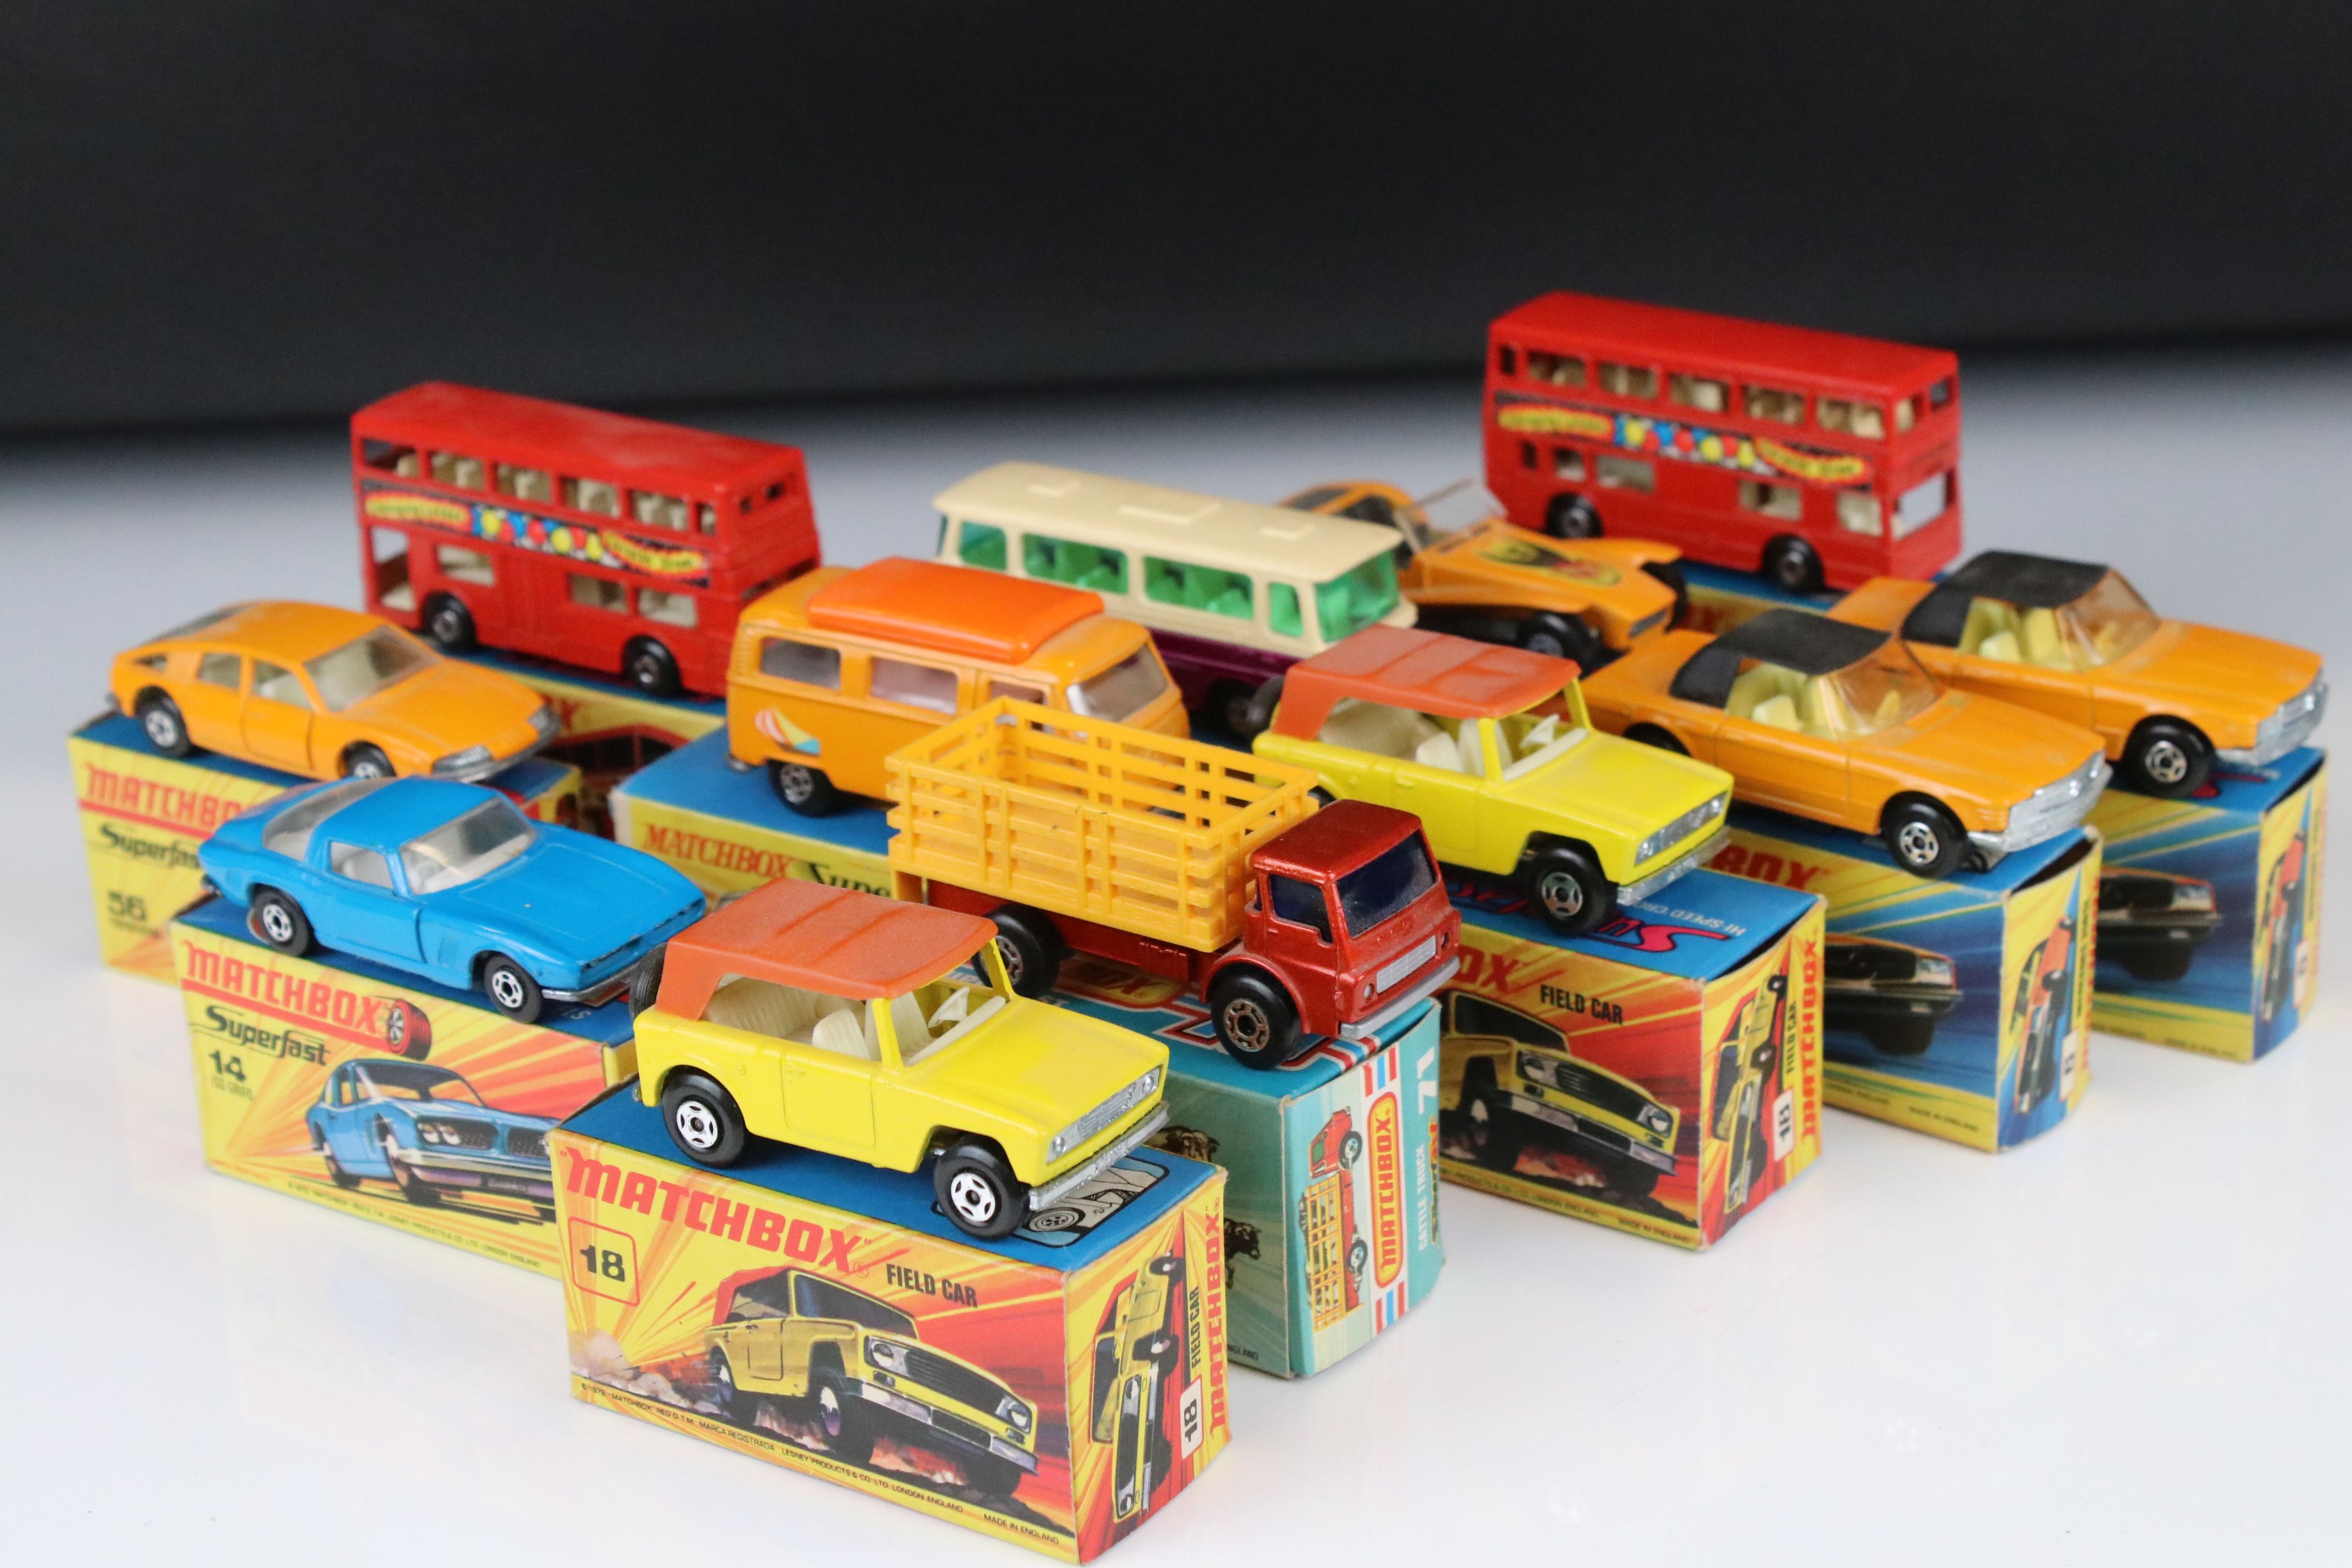 12 Boxed Matchbox 75 Series & Superfast diecast models to include 2 x 18 Field Car, 6 Mercedes